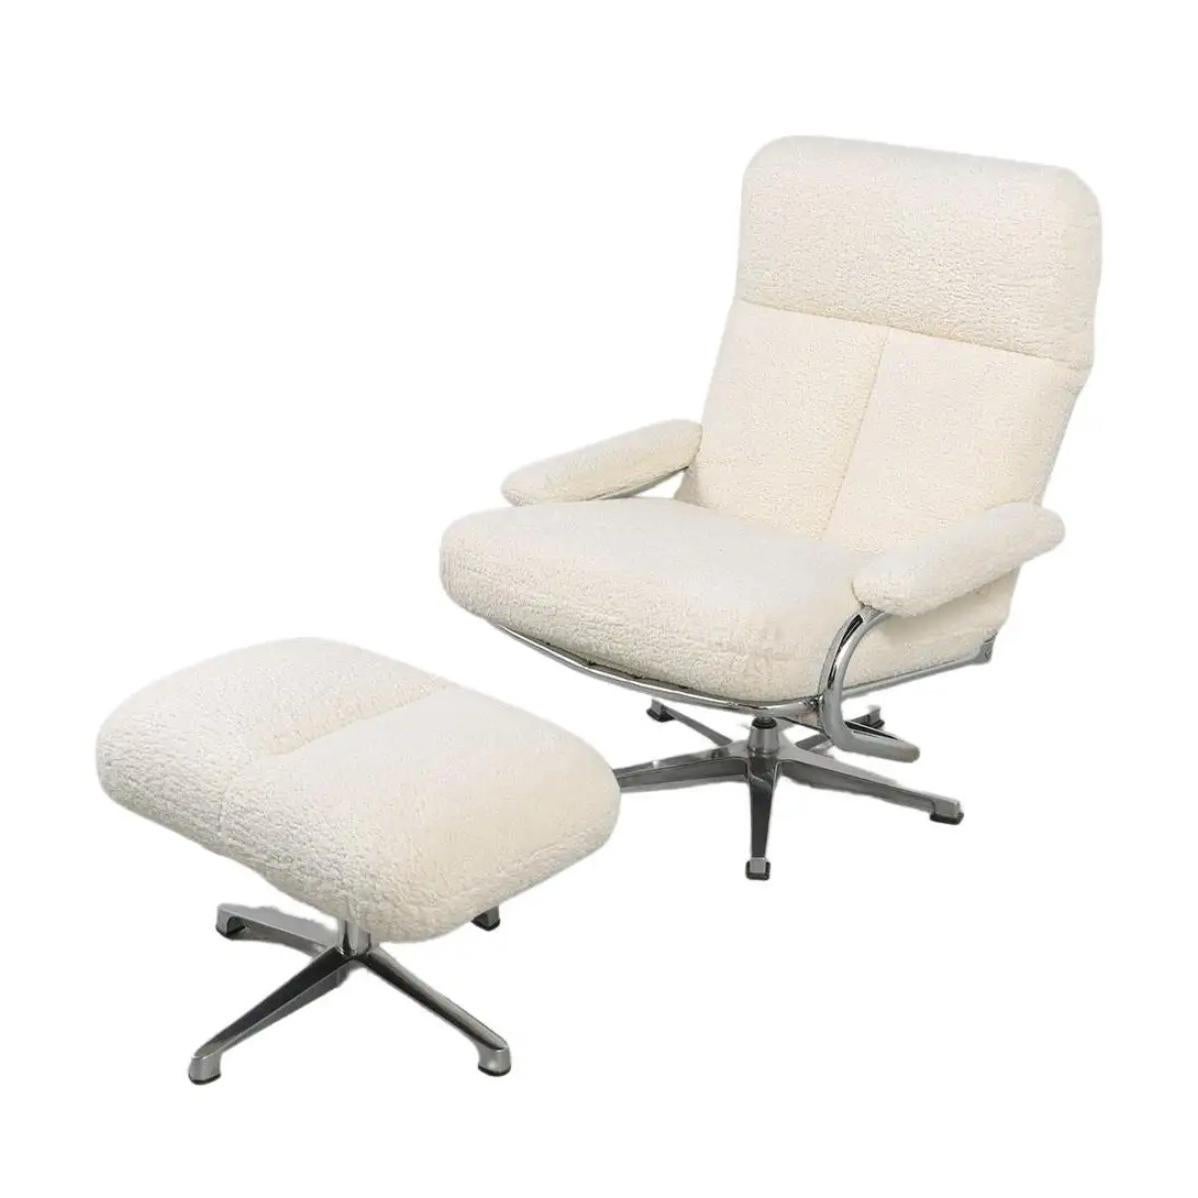 1970s Chrome-Plated Recliner Chair and Ottoman Set with Bouclé Upholstery For Sale 7